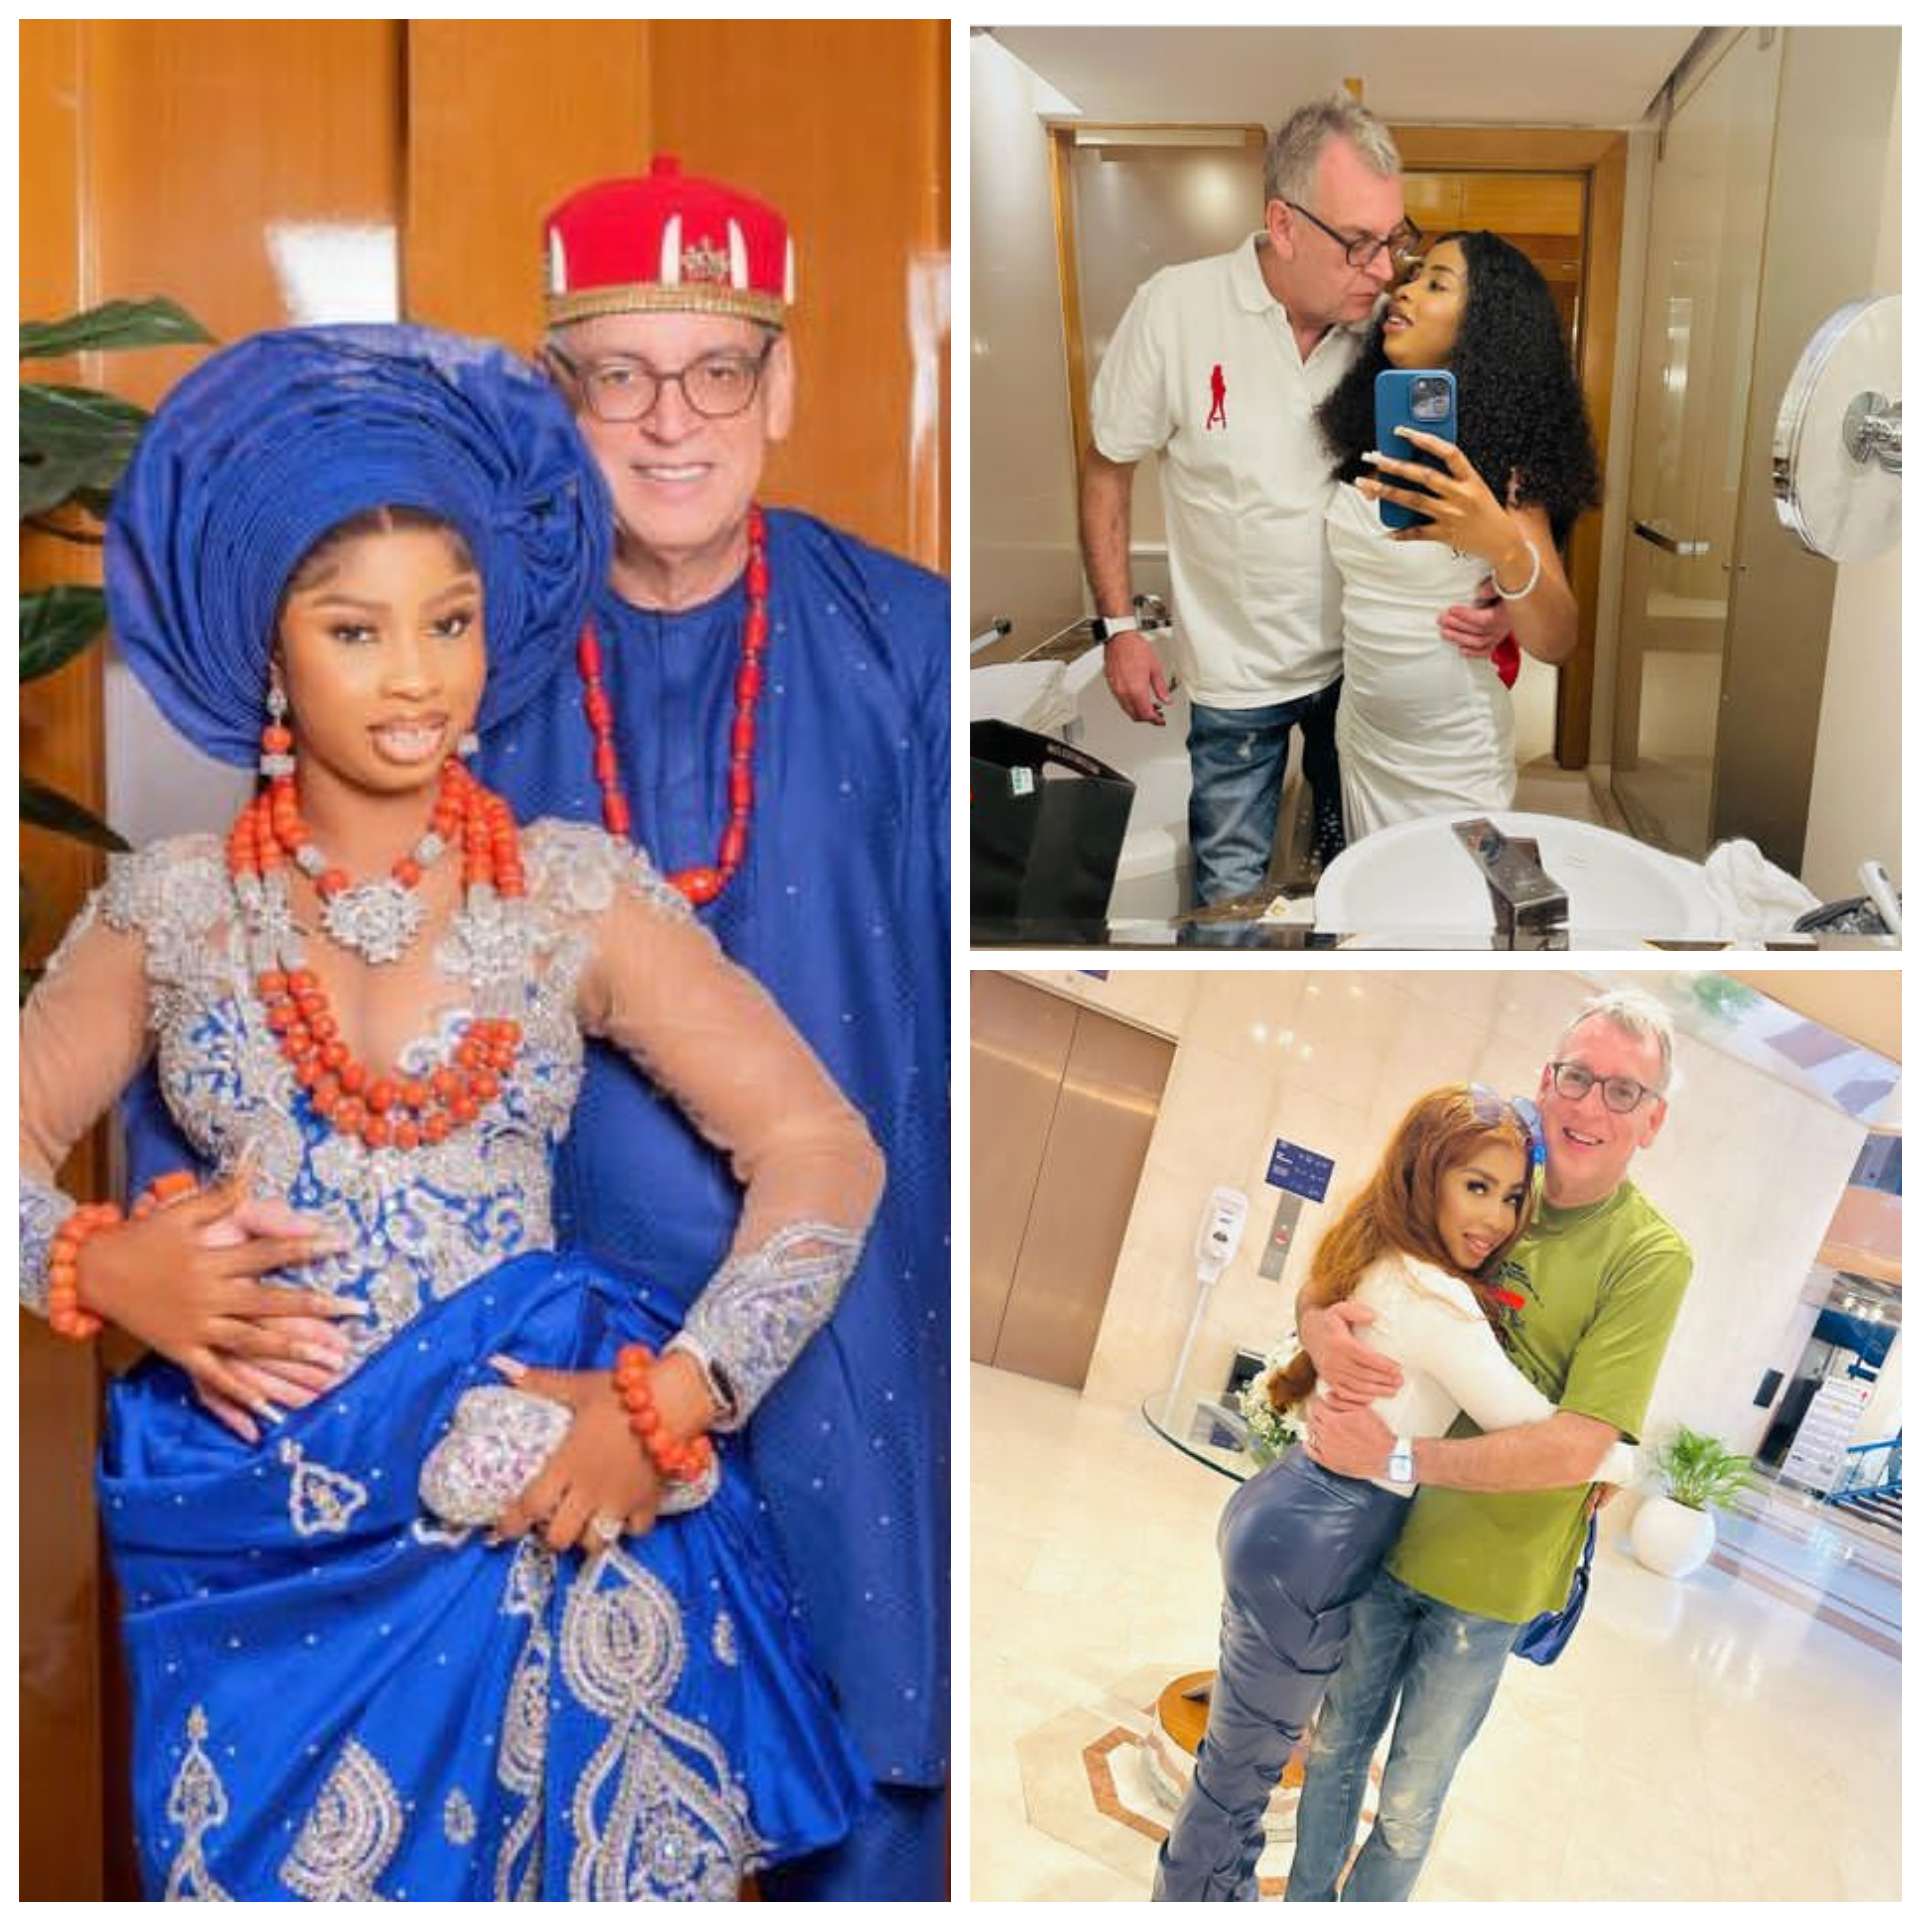 “I CHOOSE HAPPINESS OVER EVERYTHING” – 22-YEAR-OLD NIGERIAN LADY HITS BACK AT TROLLS SHAMING HER FOR MARRYING AN ‘OLD MAN’